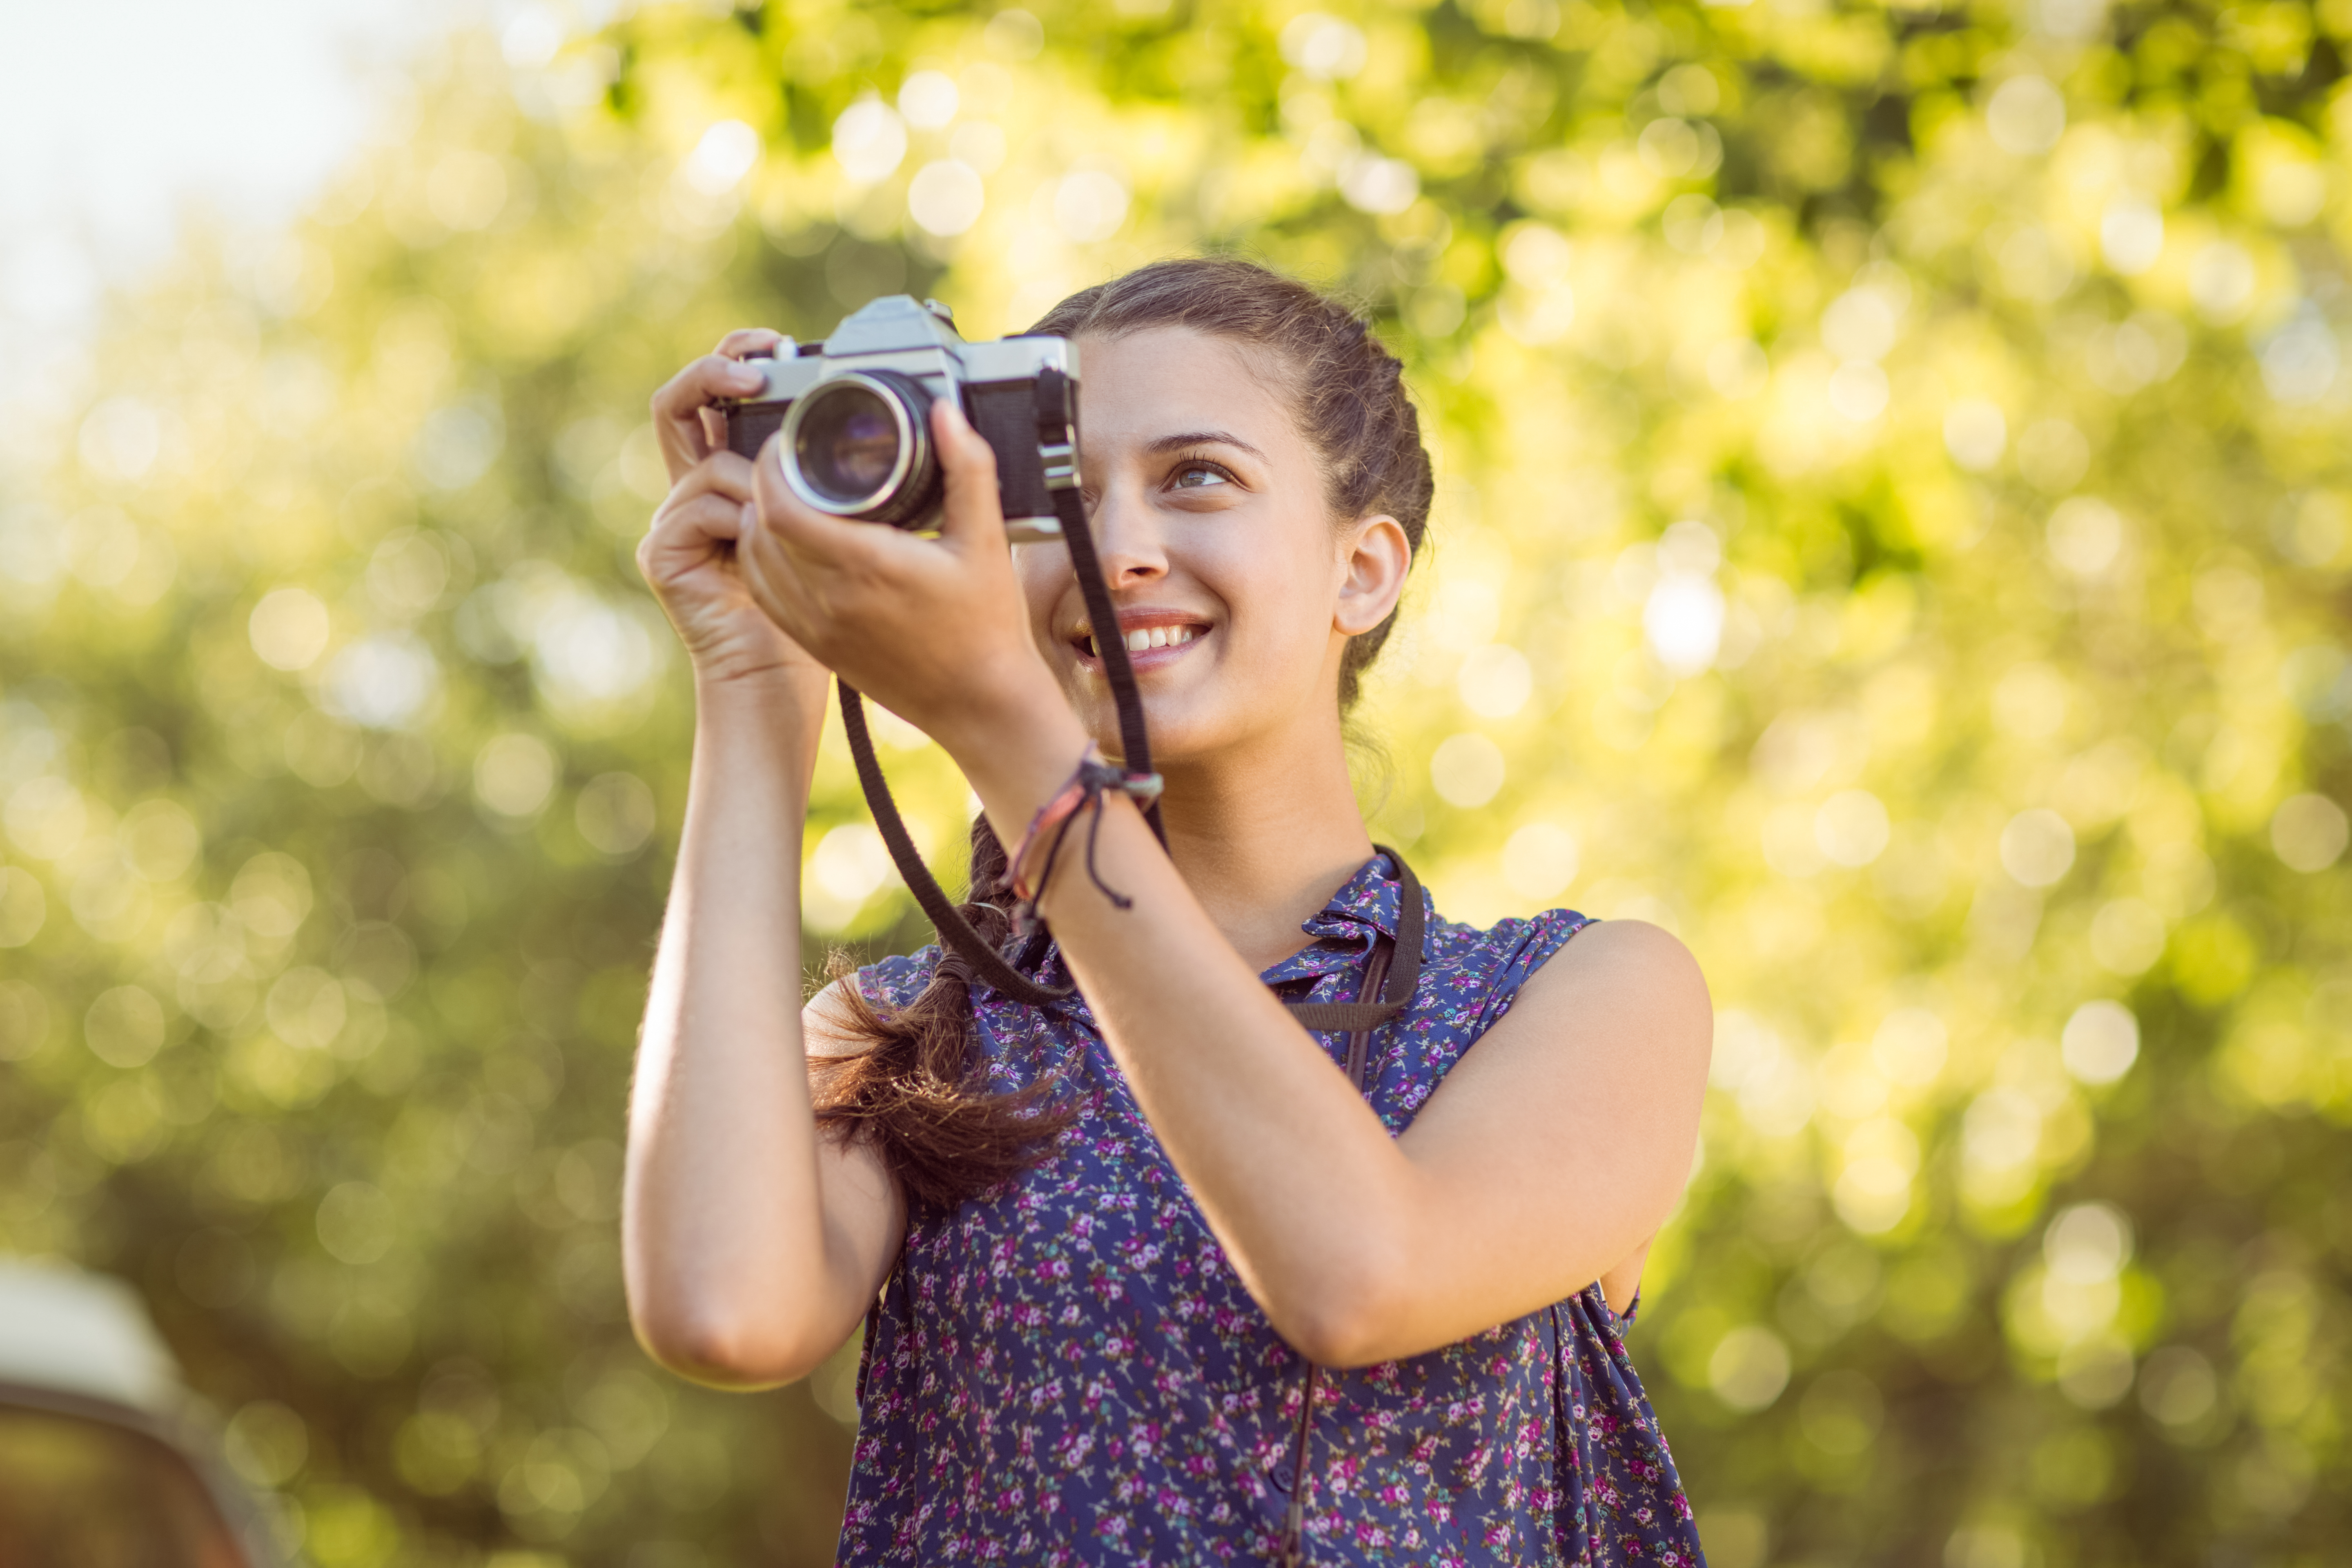 TOP 5 WAYS PHOTOGRAPHY BOOSTS YOUR WELLBEING